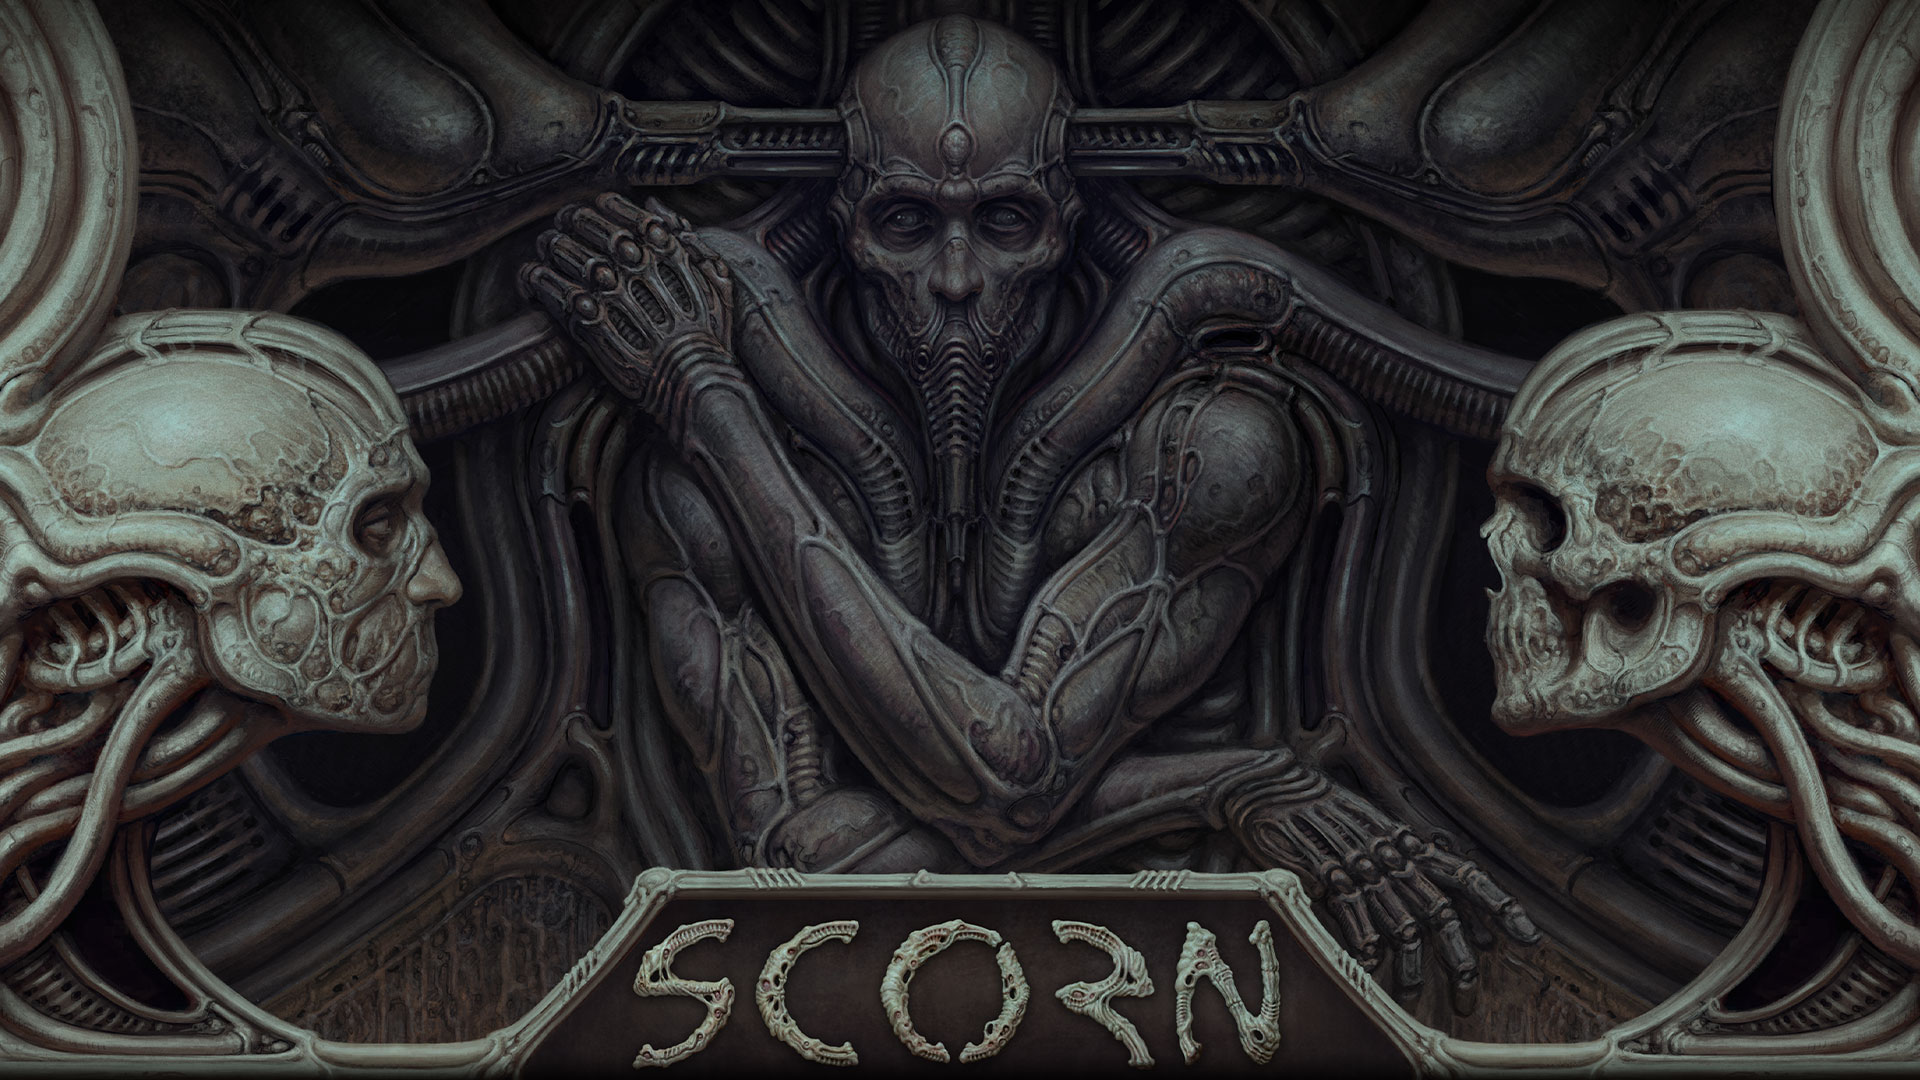 Scorn story explained: What is Scorn about (+ending)